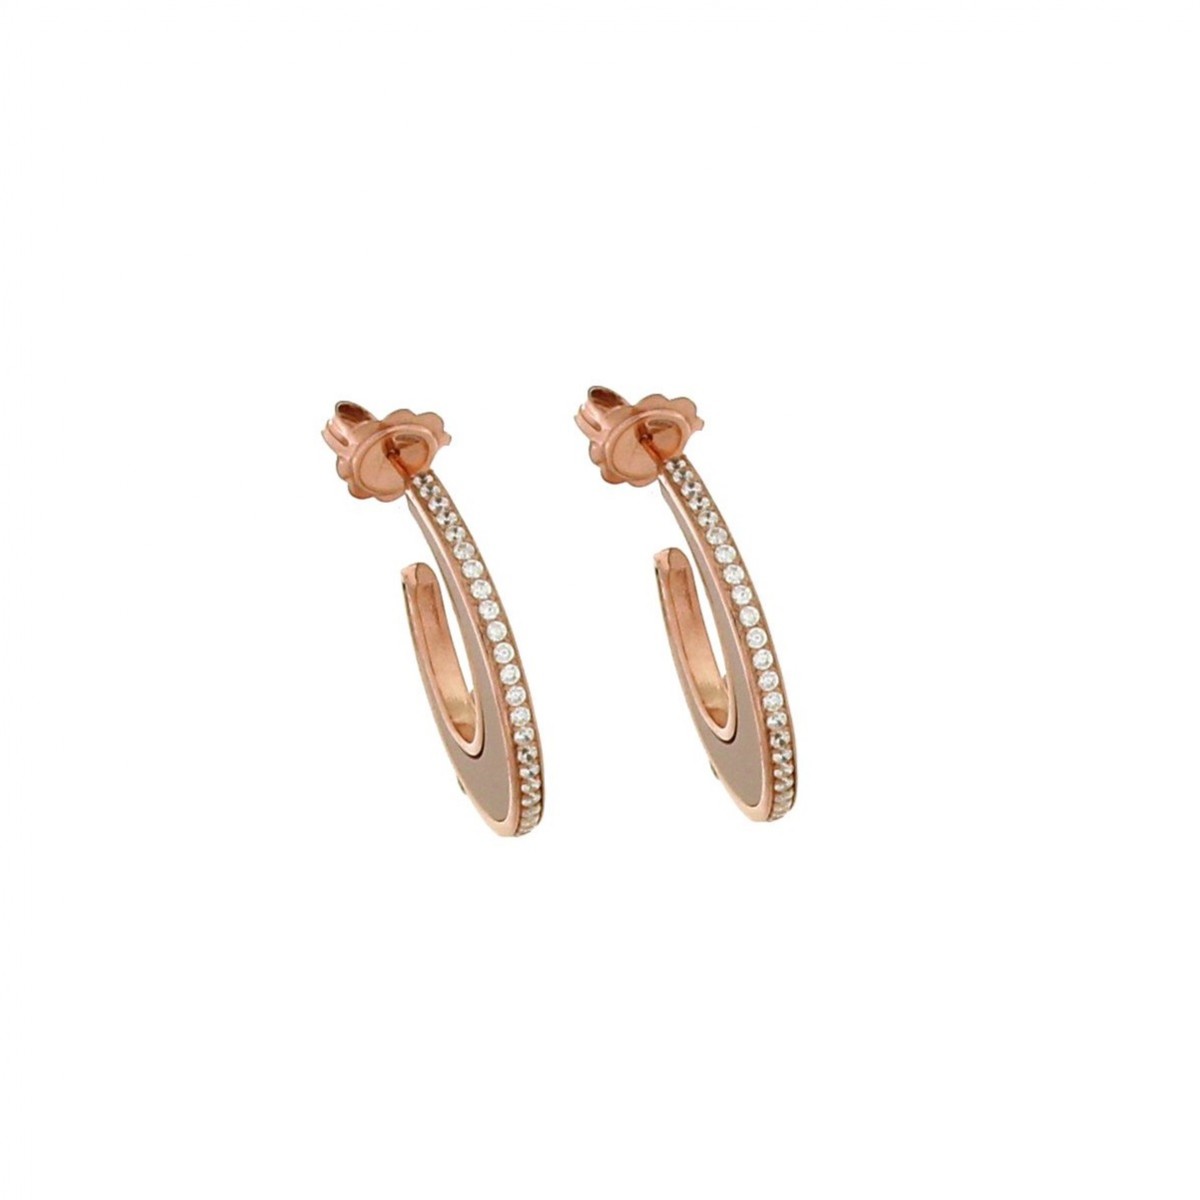 SILVER EARINGS PING GOLD WITH STONES VERITA TRUE LUXURY